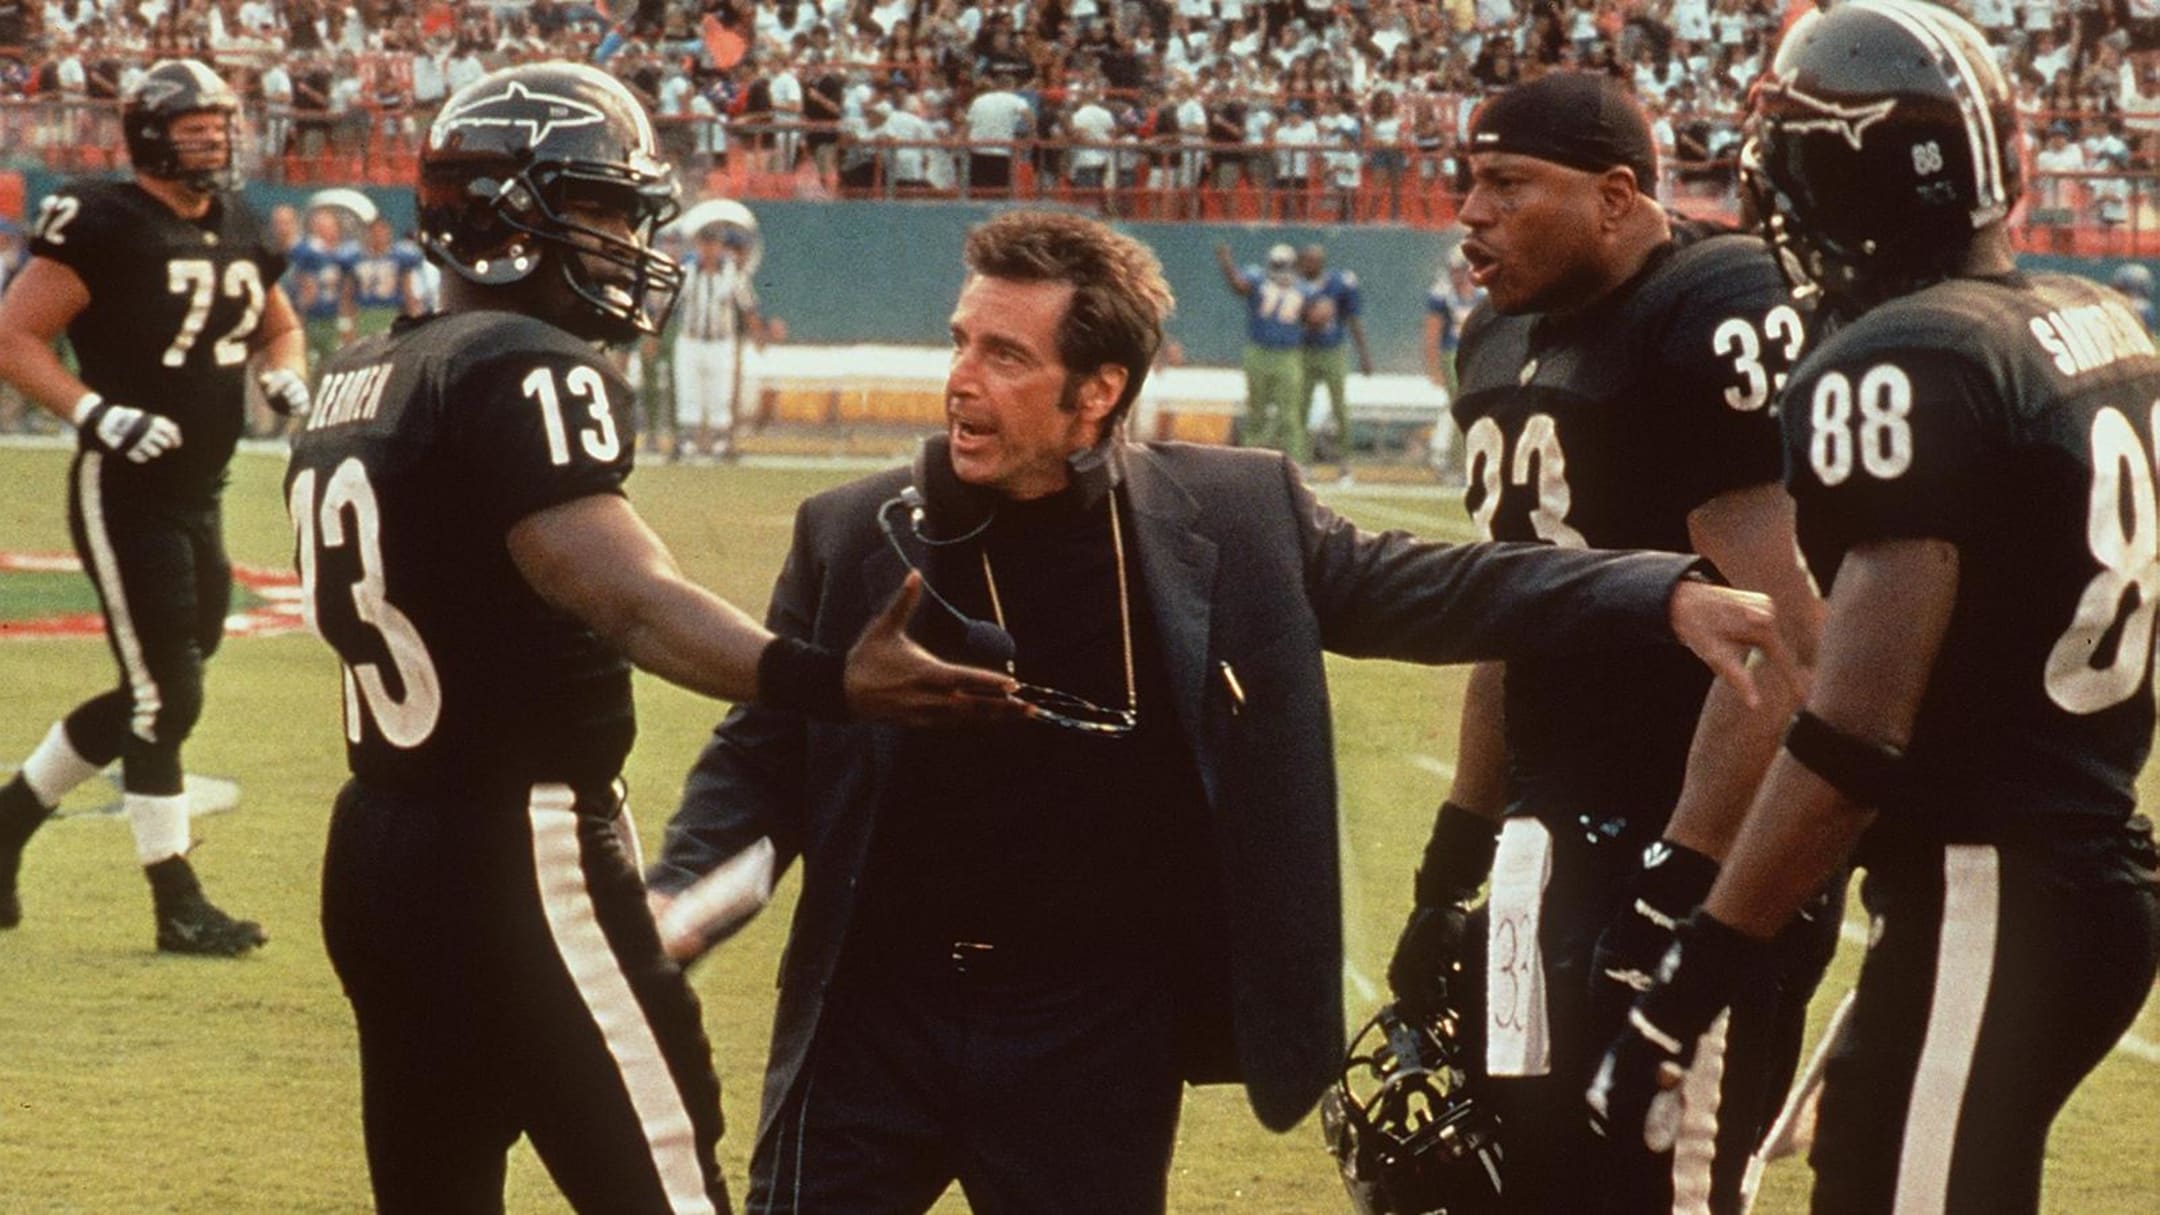 Movies you can stream now to get your football fix | Yardbarker